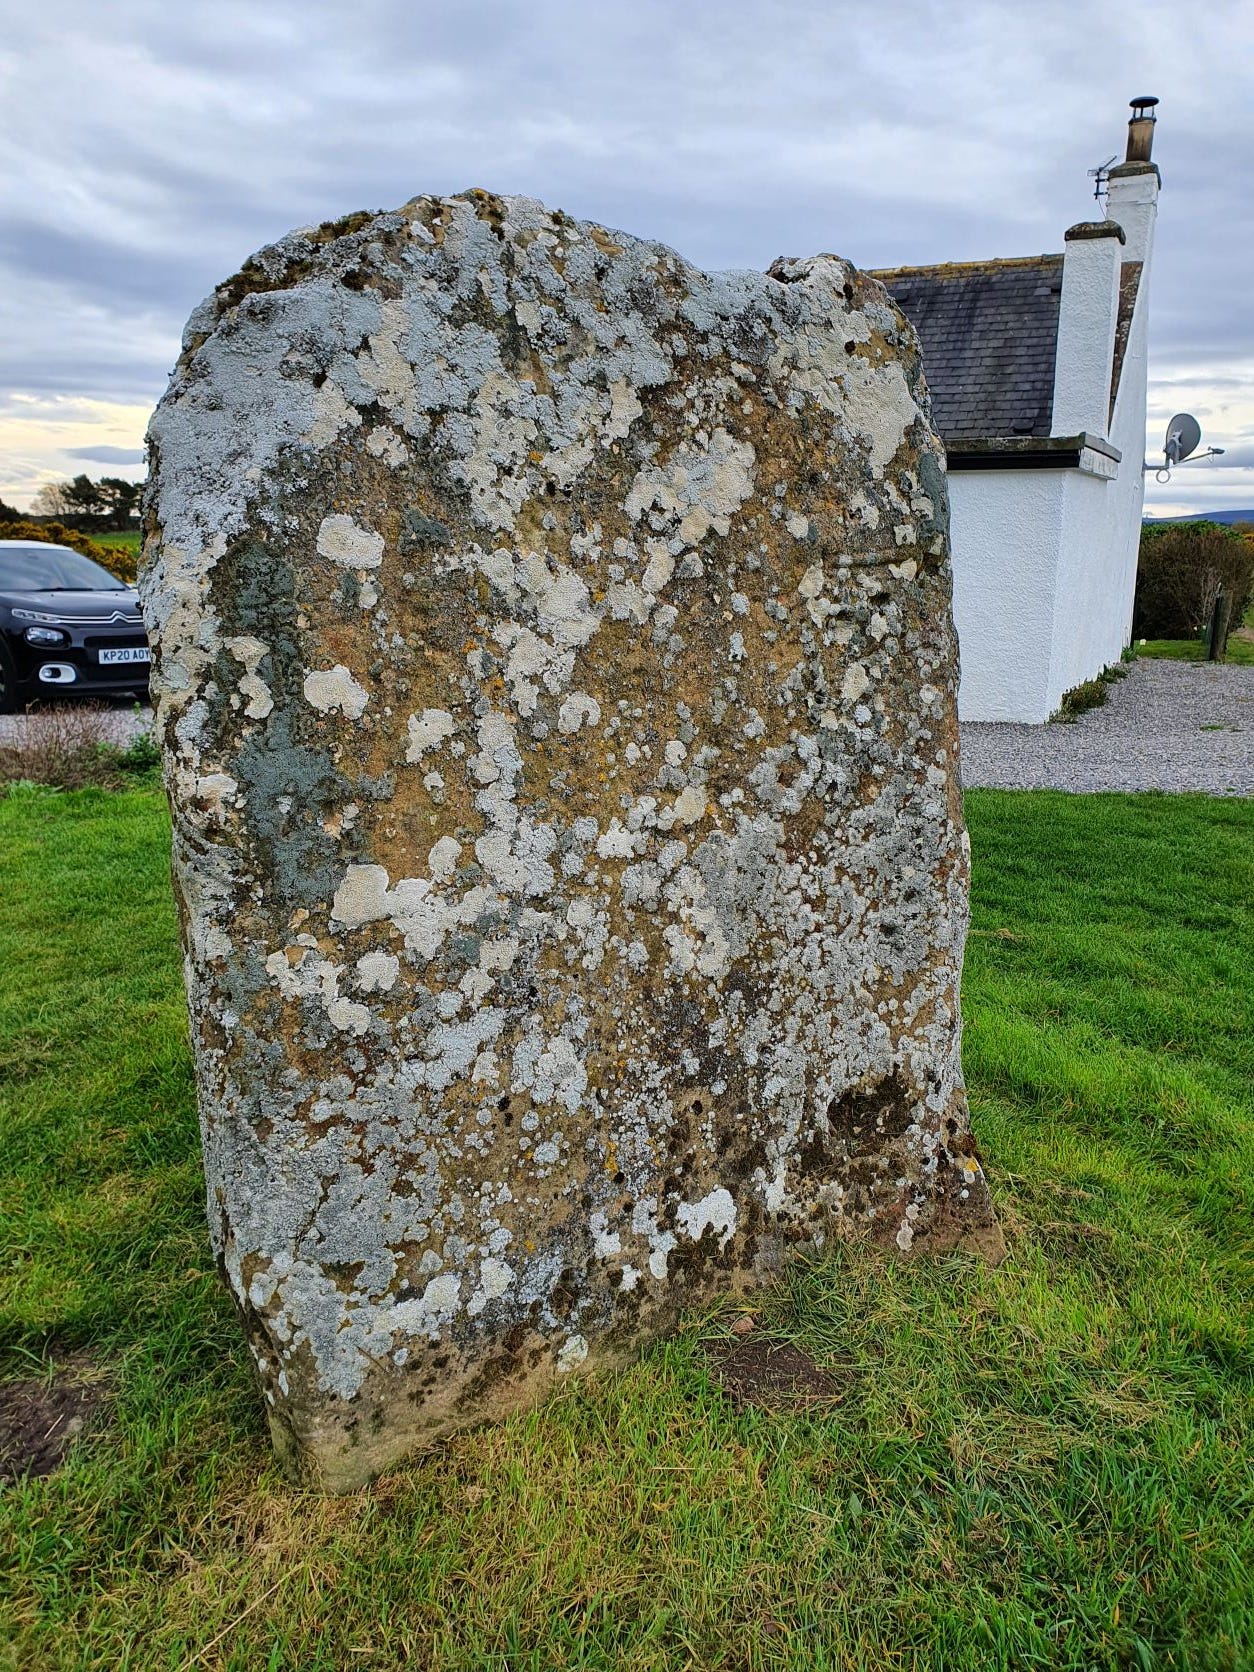 The cross-face of the Kebbuck Stone, eroded and overgrown with lichen